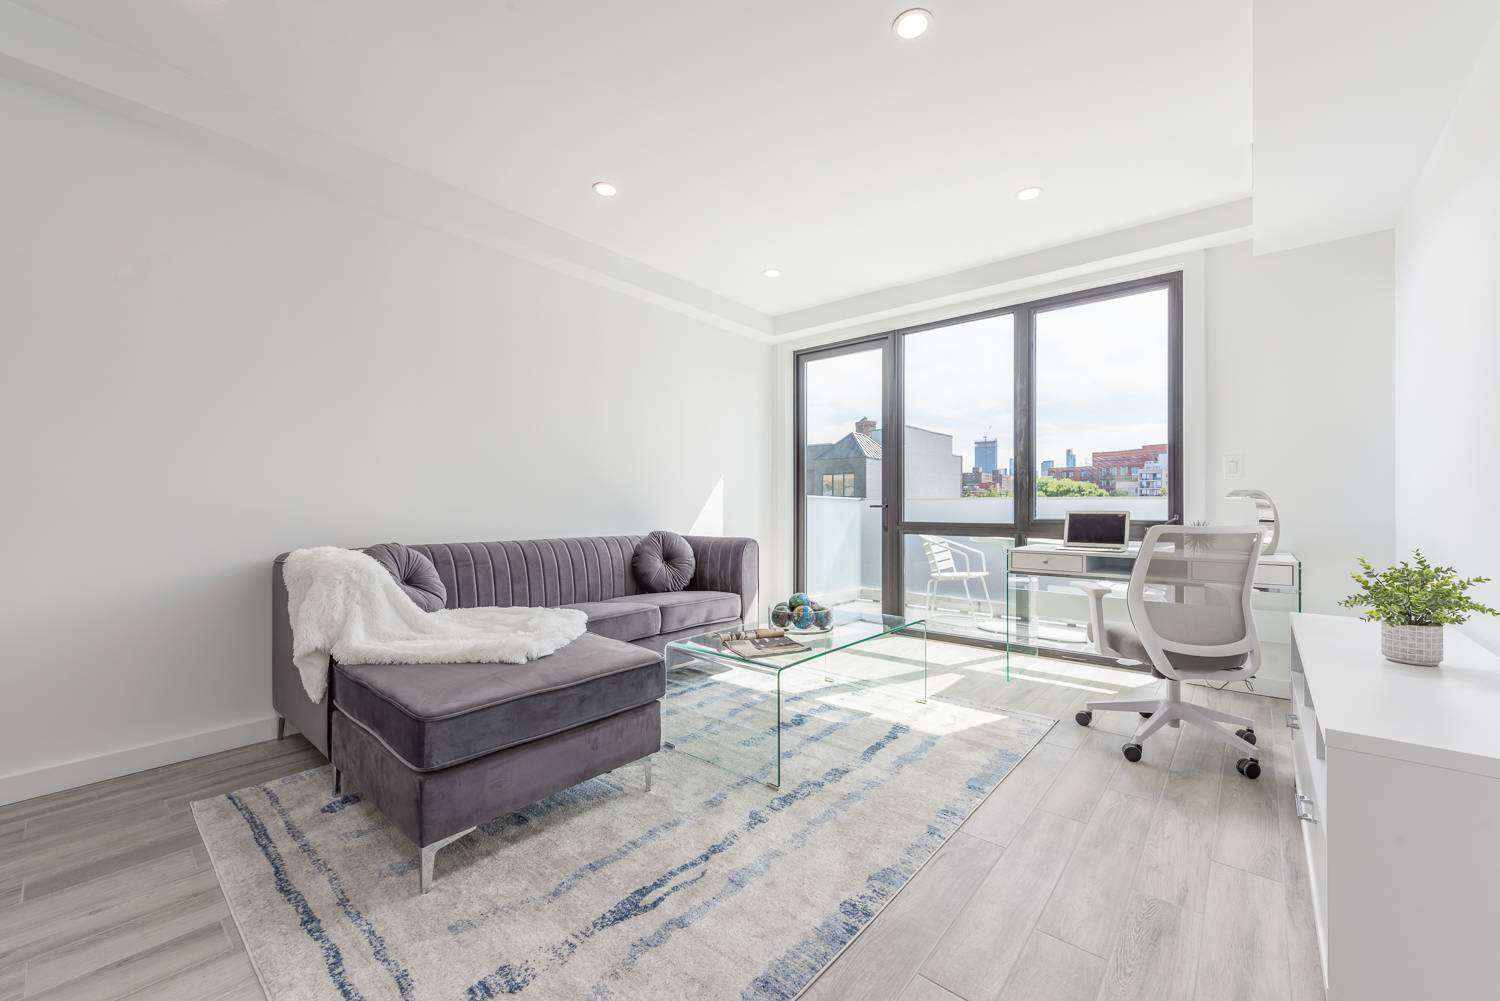 Find your perfect fit. It's here for you at 14 11 31st Avenue, a welcoming intimate enclave in the heart of Astoria.